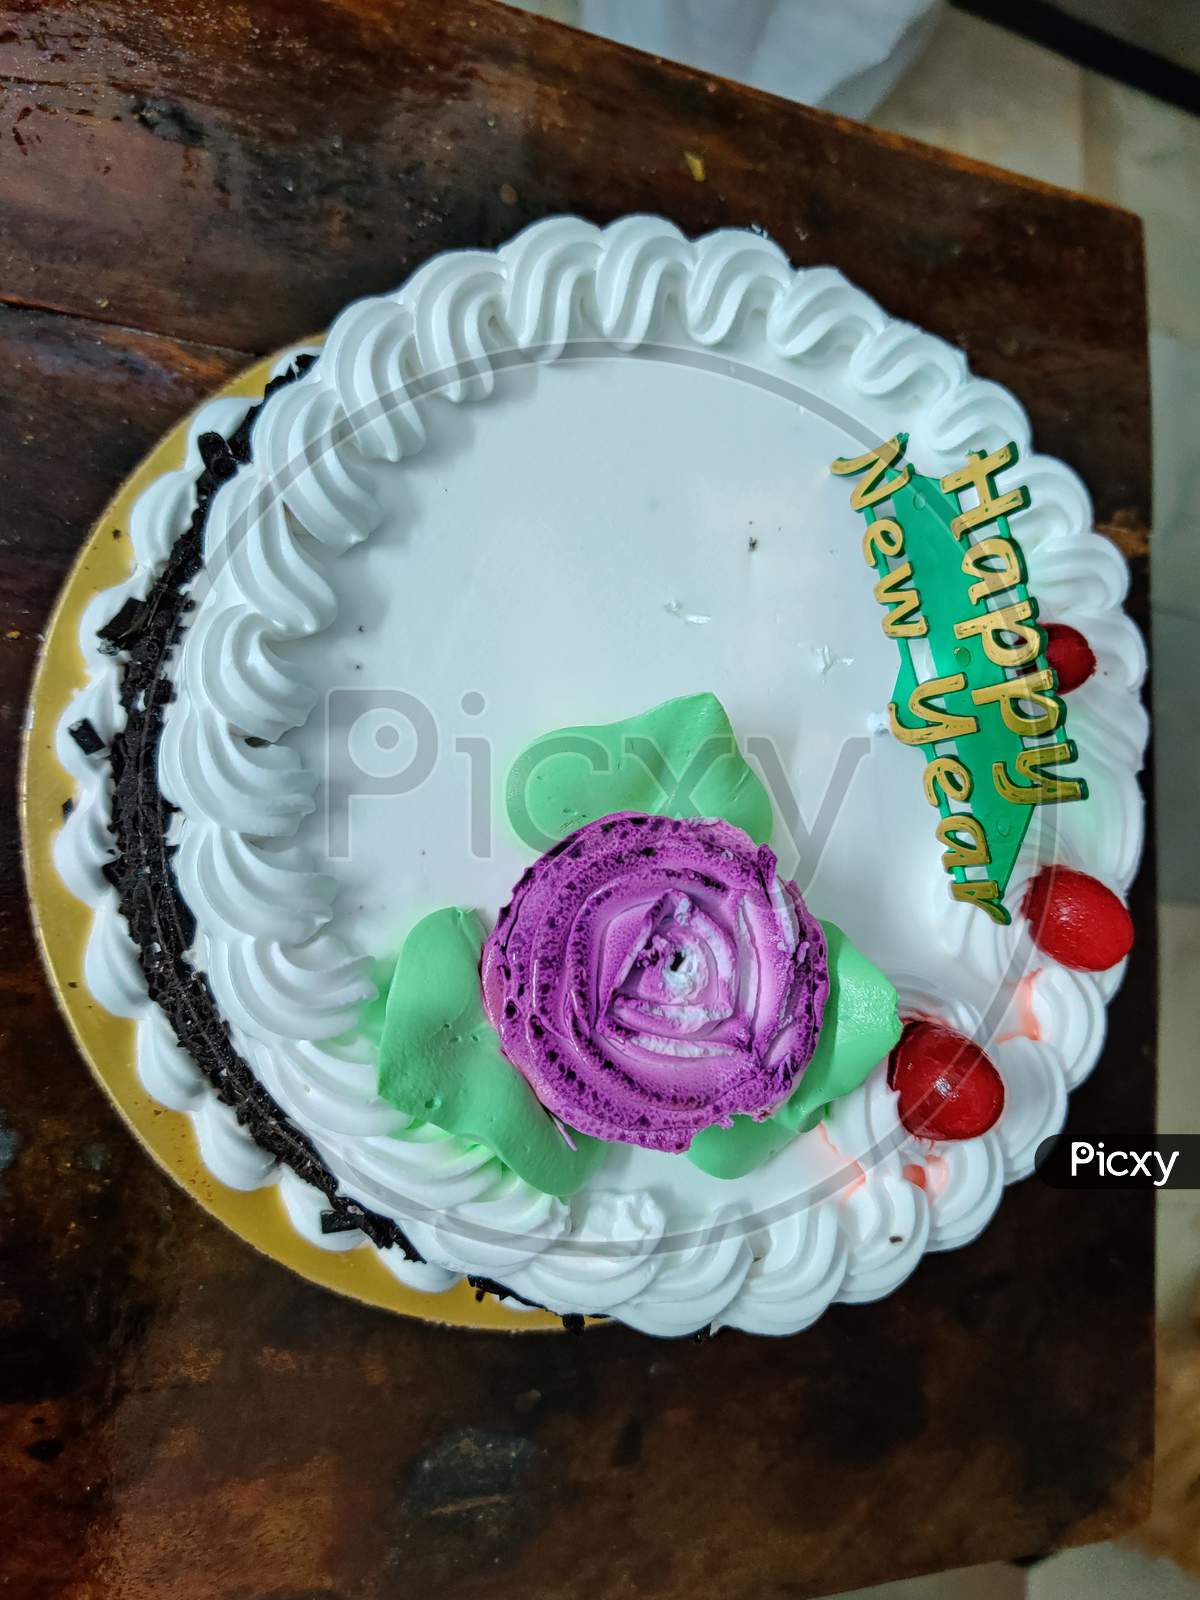 Happy New Year Cake Images With Name And Photo